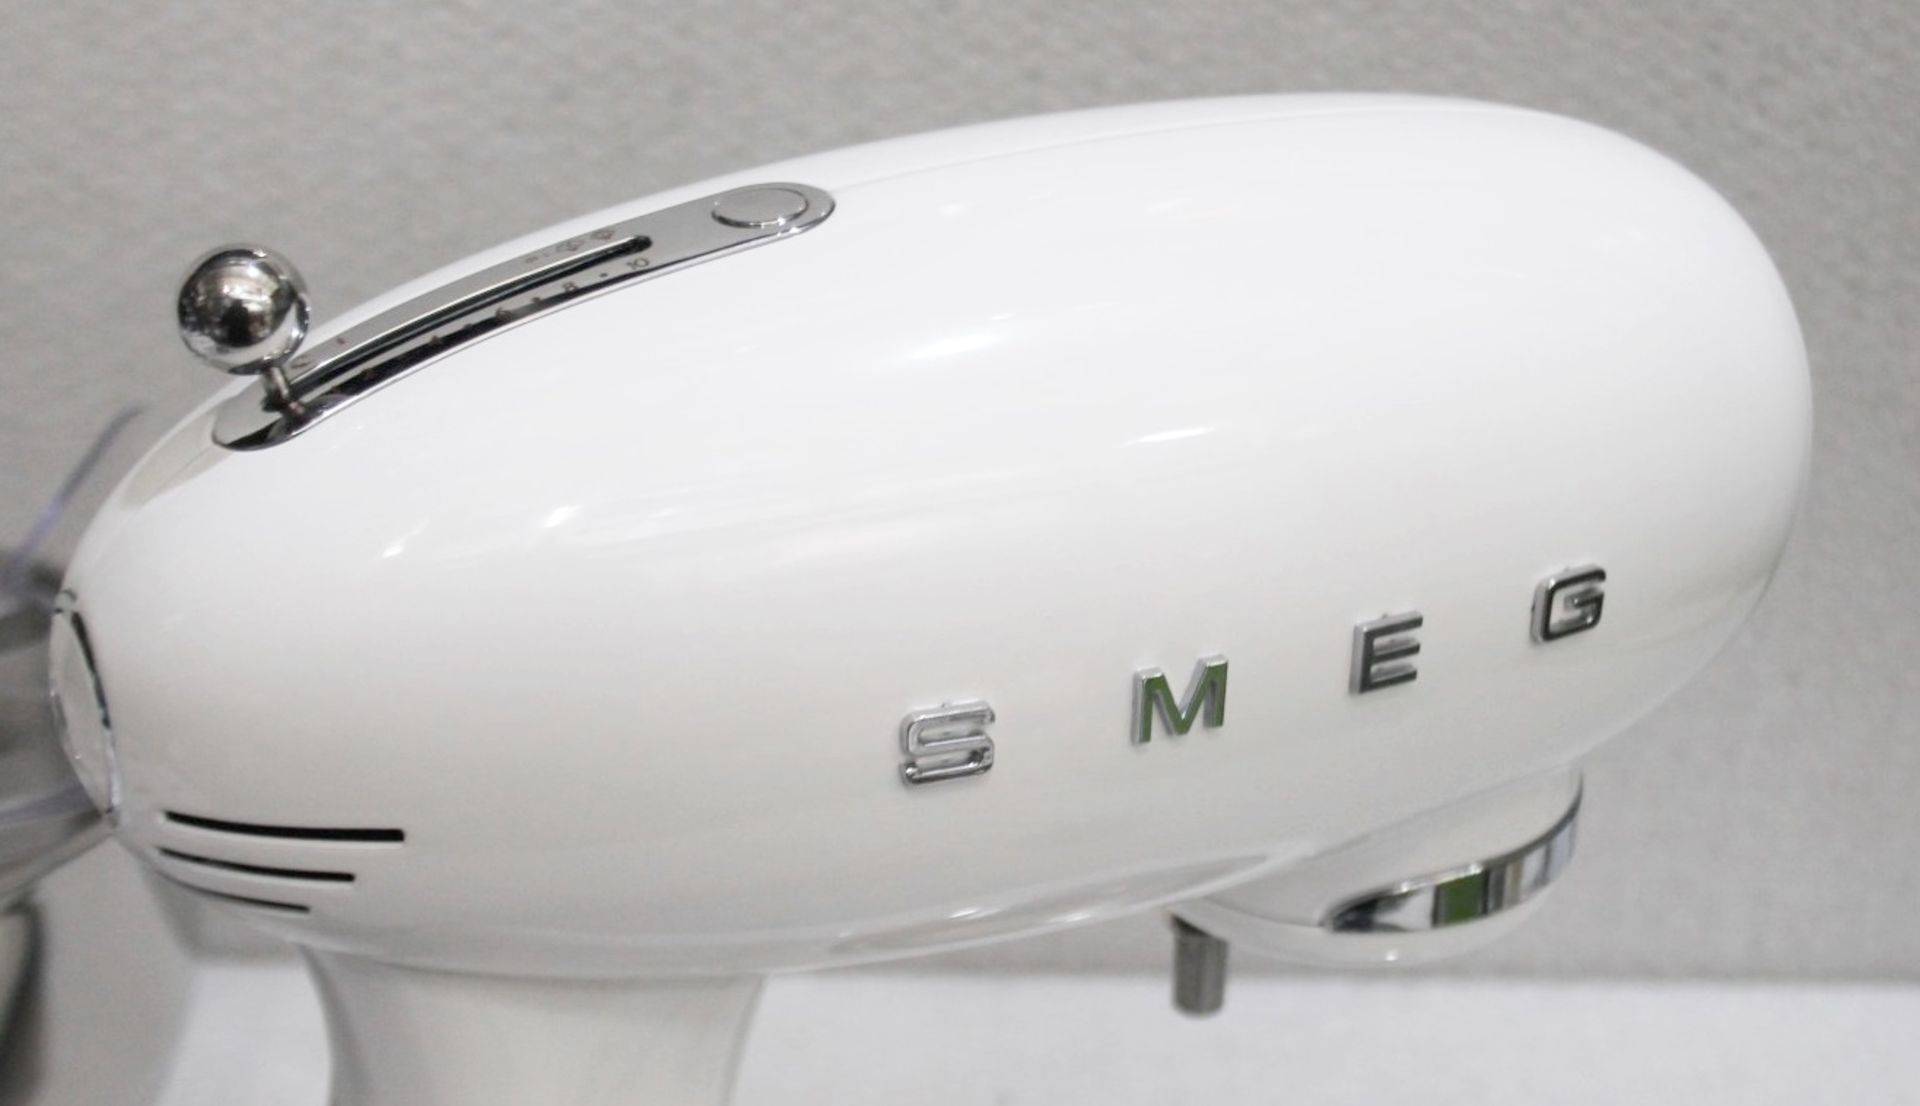 1 x SMEG 50'S Style Stand Mixer In White (4.8L) - Original Price £499.00 - Unused Boxed Stock - Image 4 of 21